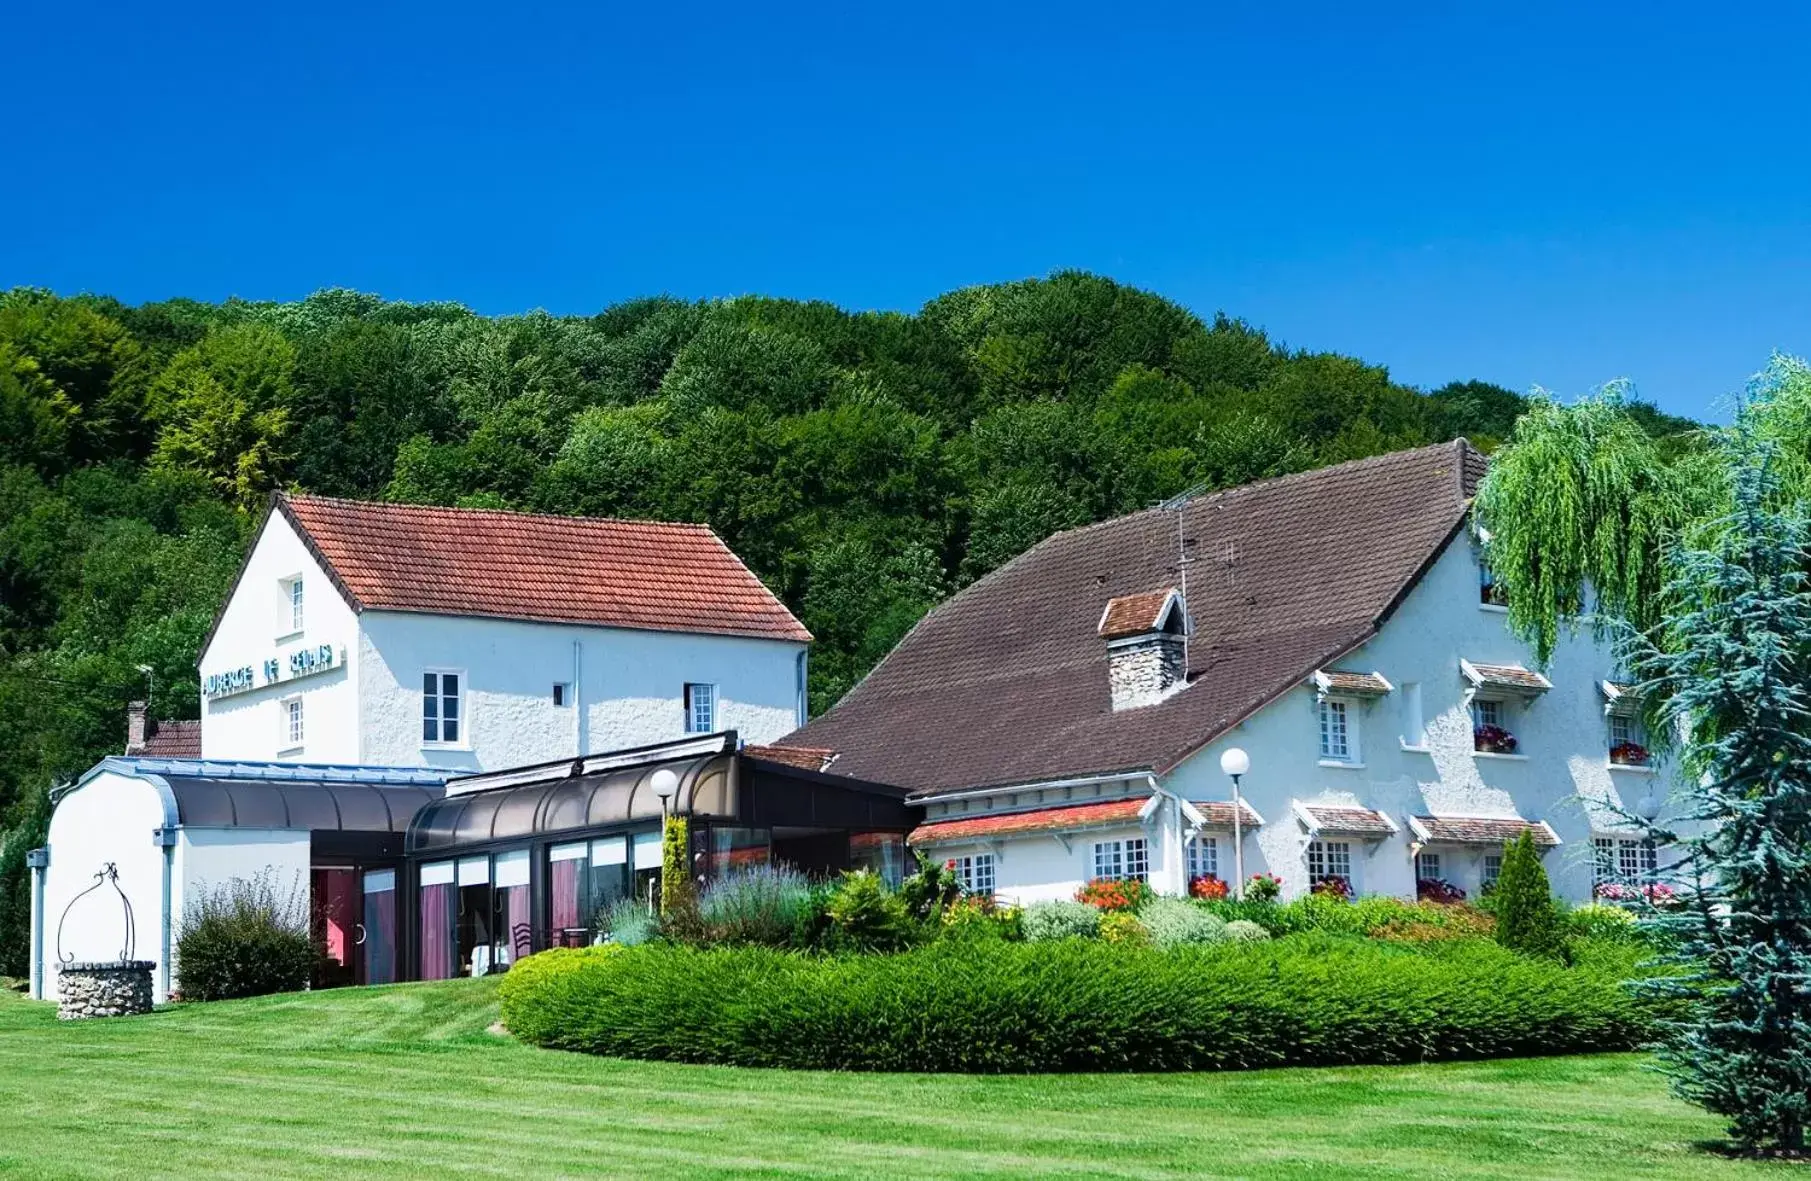 Property Building in auberge le relais